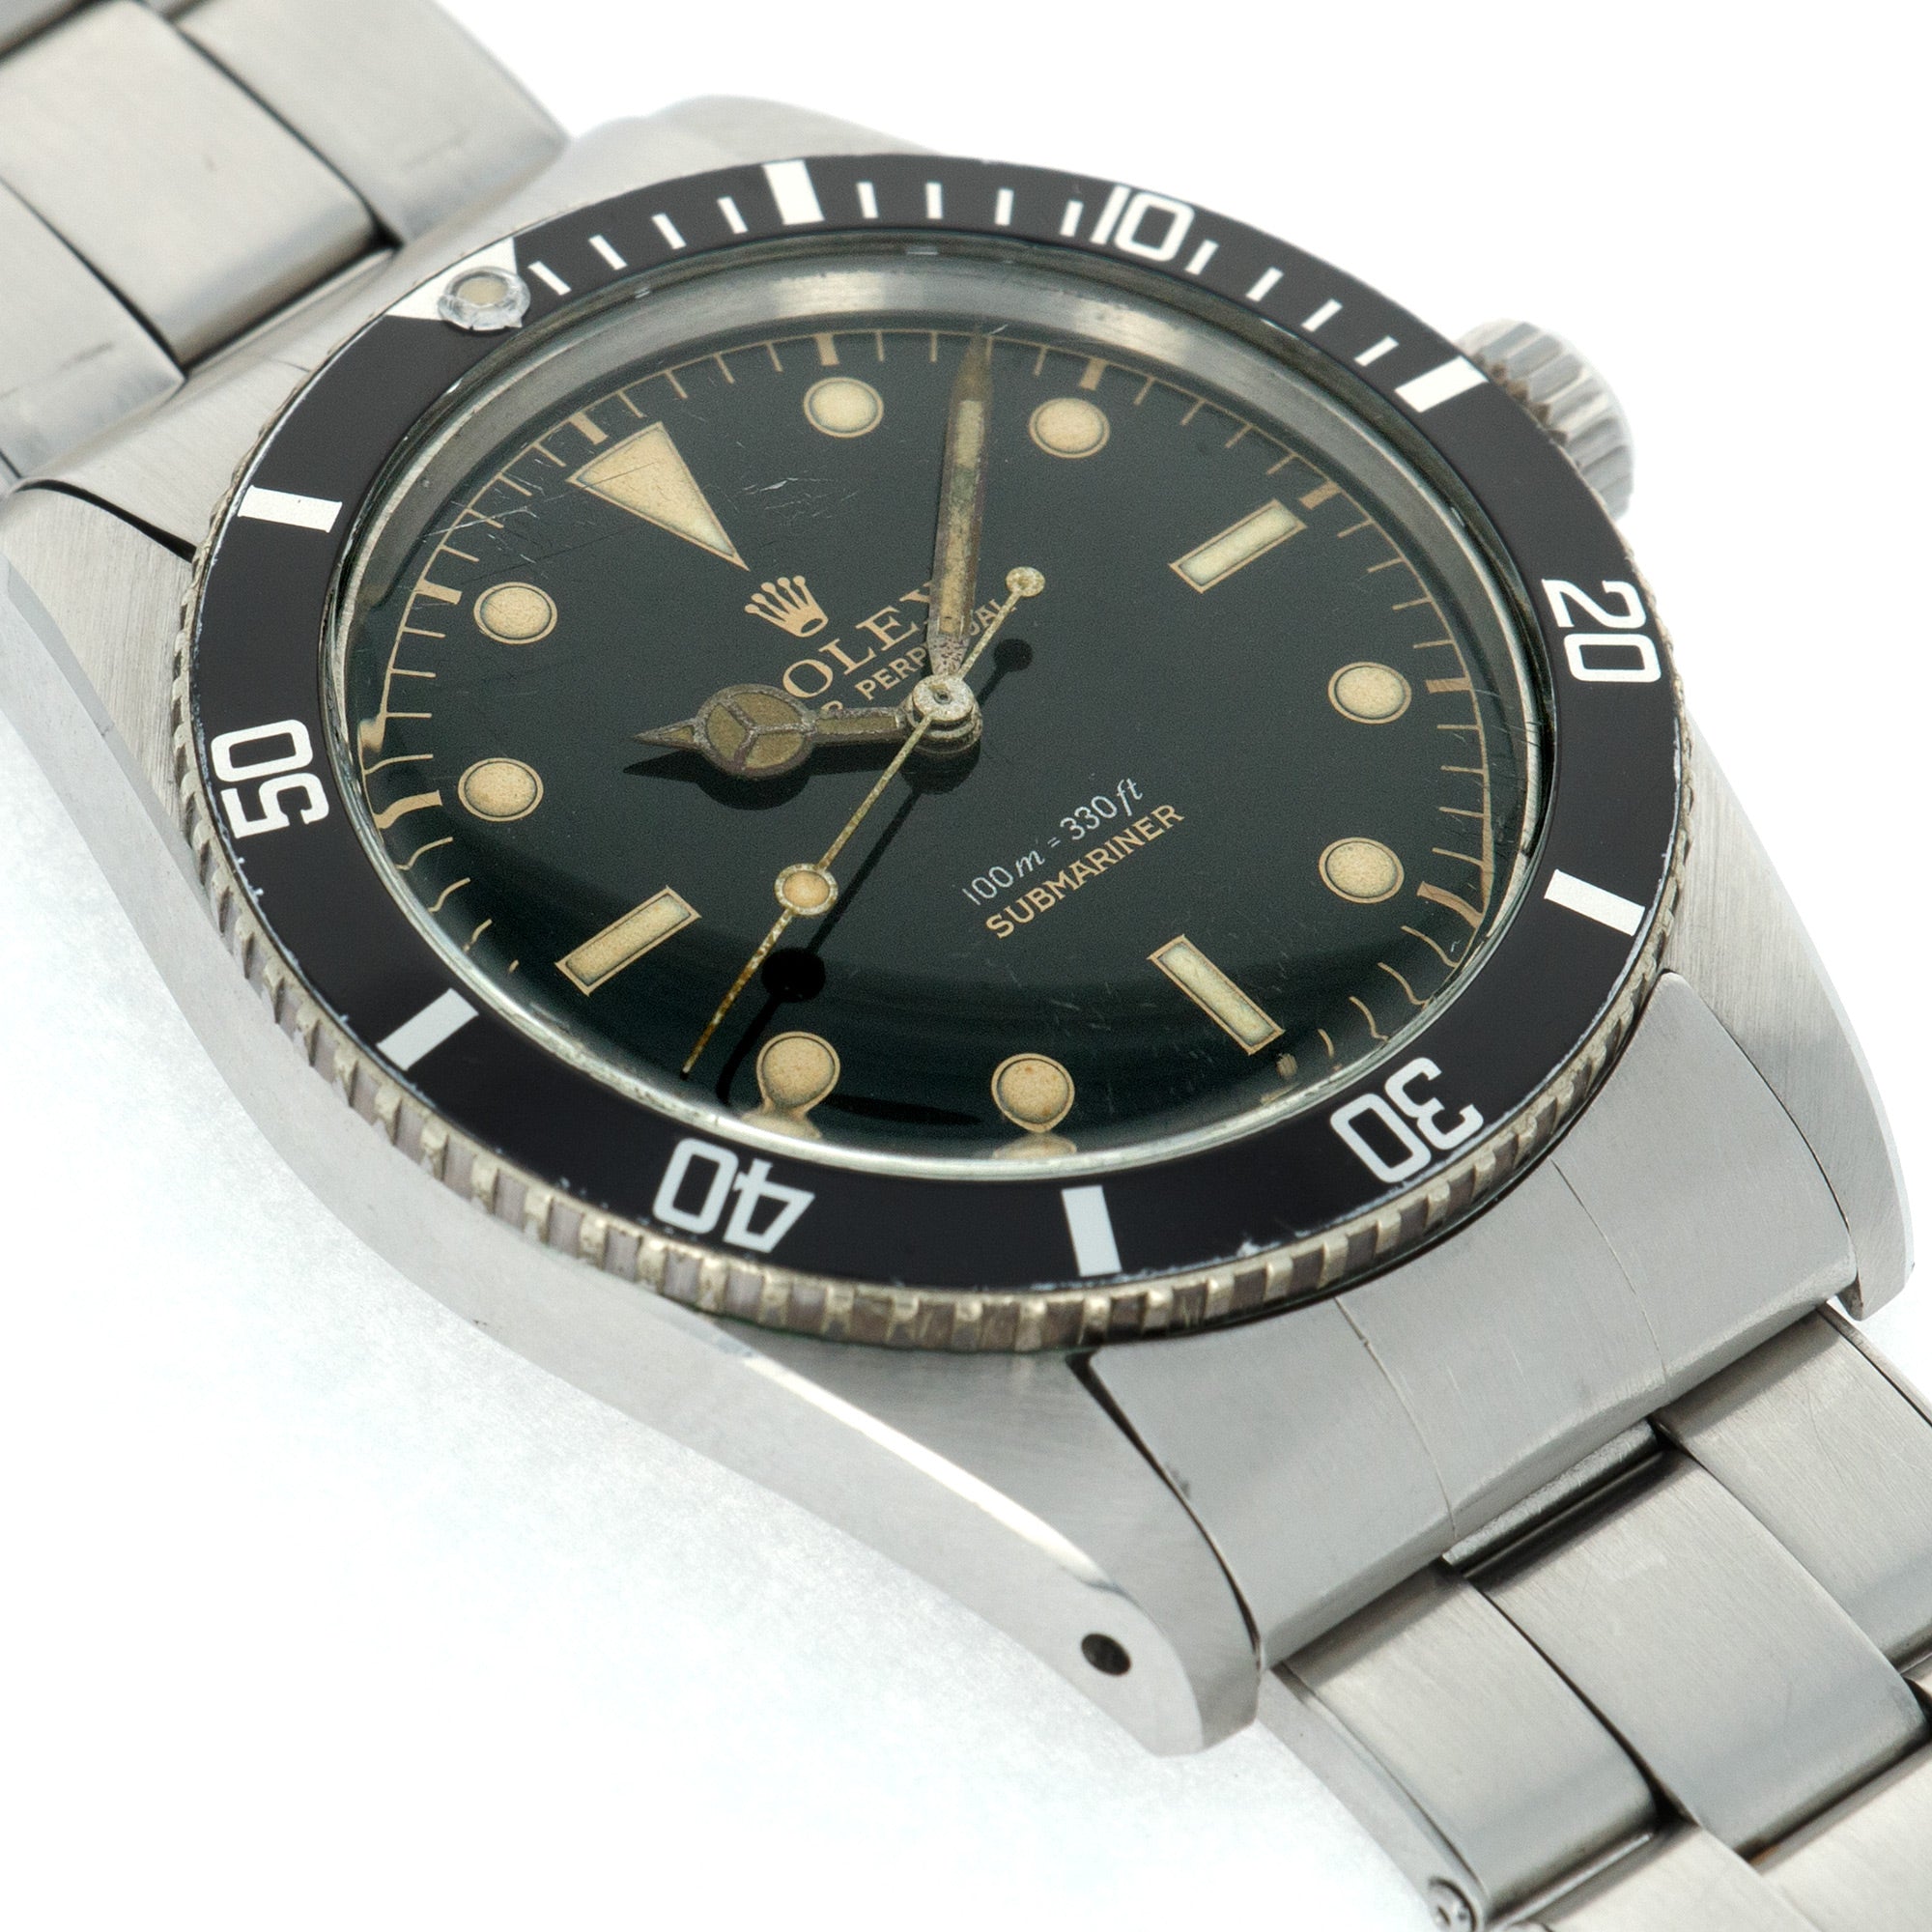 Rolex No Crown Guards Submariner Watch Ref. 5508 with Original Exclamation Point Dial